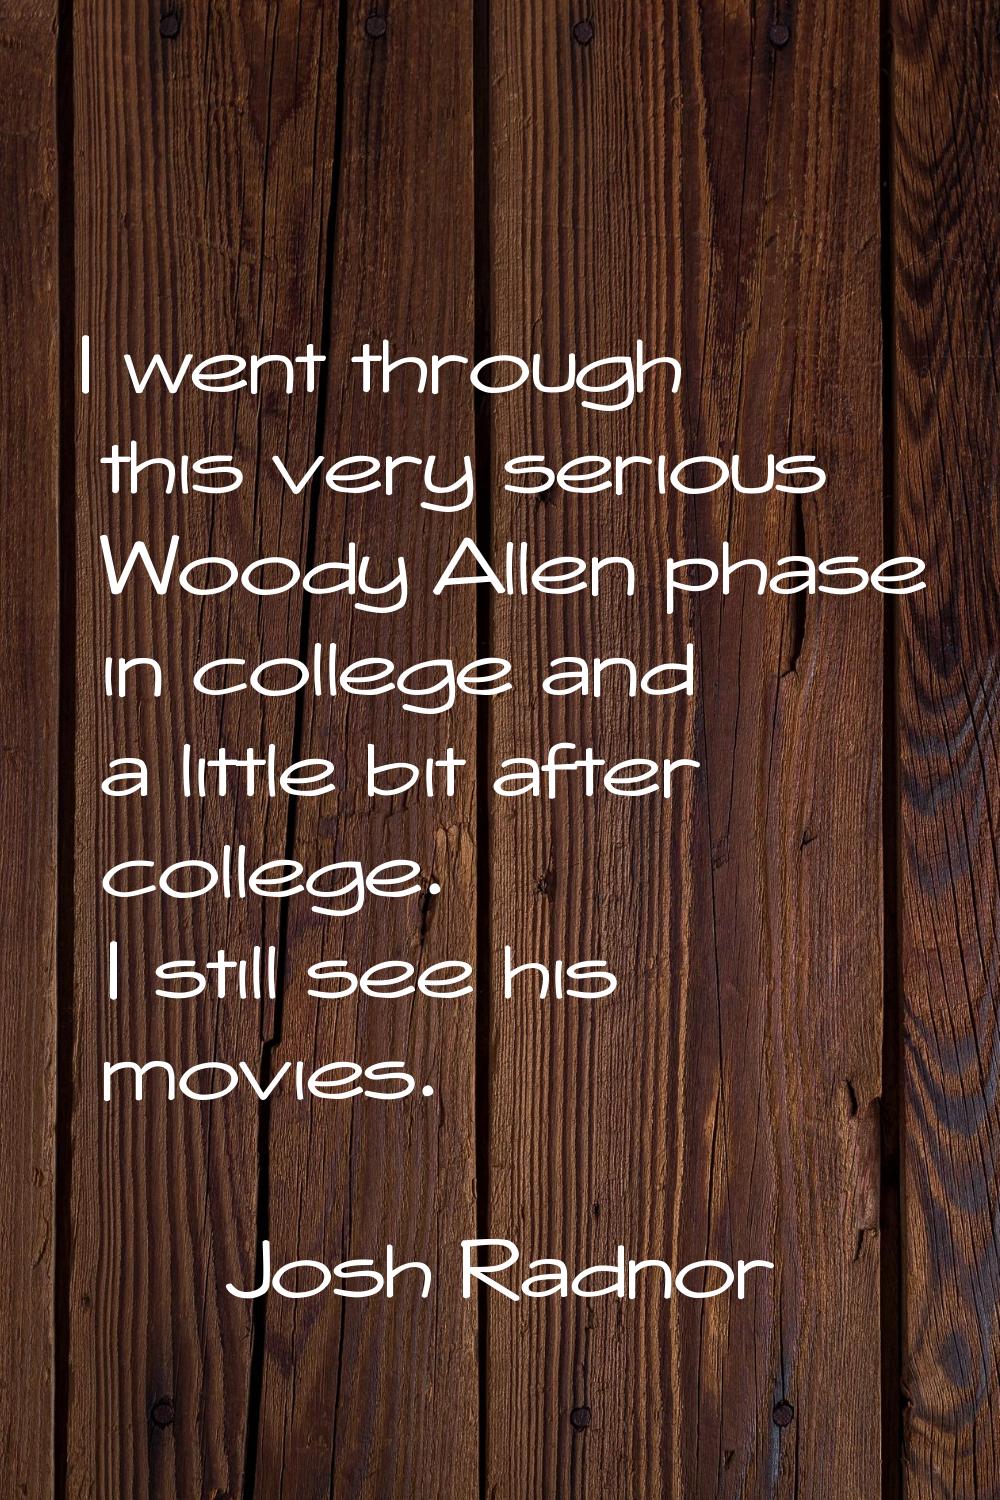 I went through this very serious Woody Allen phase in college and a little bit after college. I sti